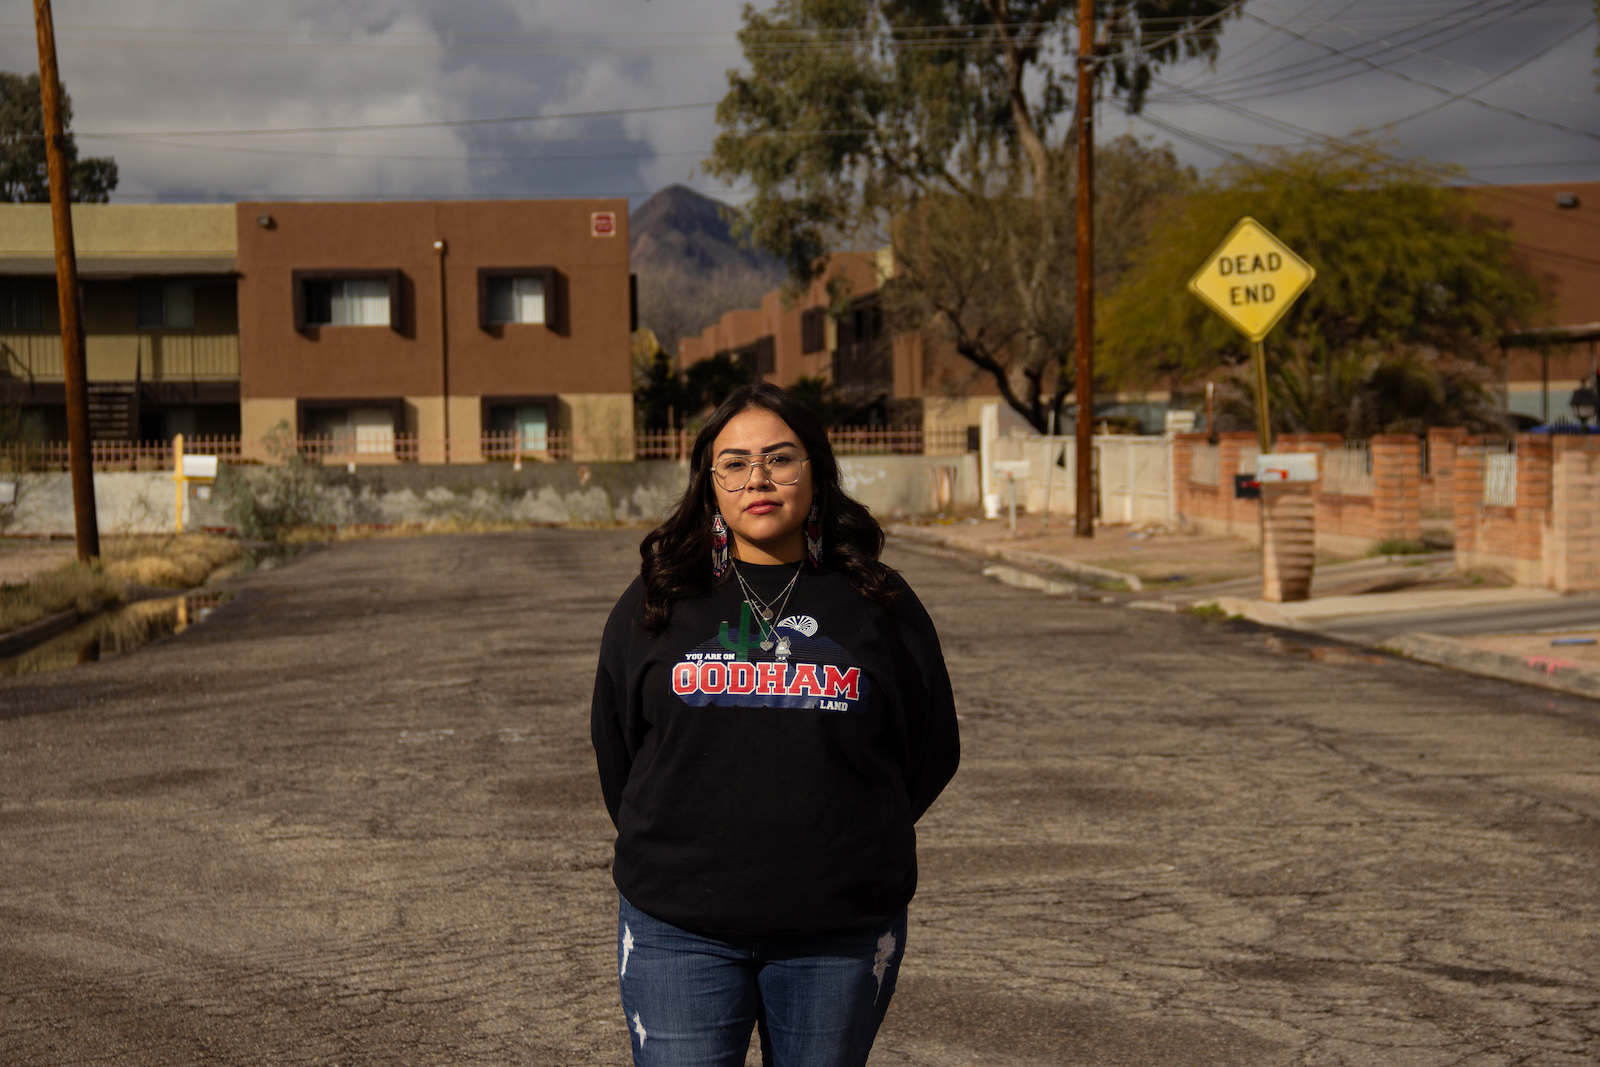 a woman in a black sweatshirt stands near a sign that says "dead end" near a flat-top brick building